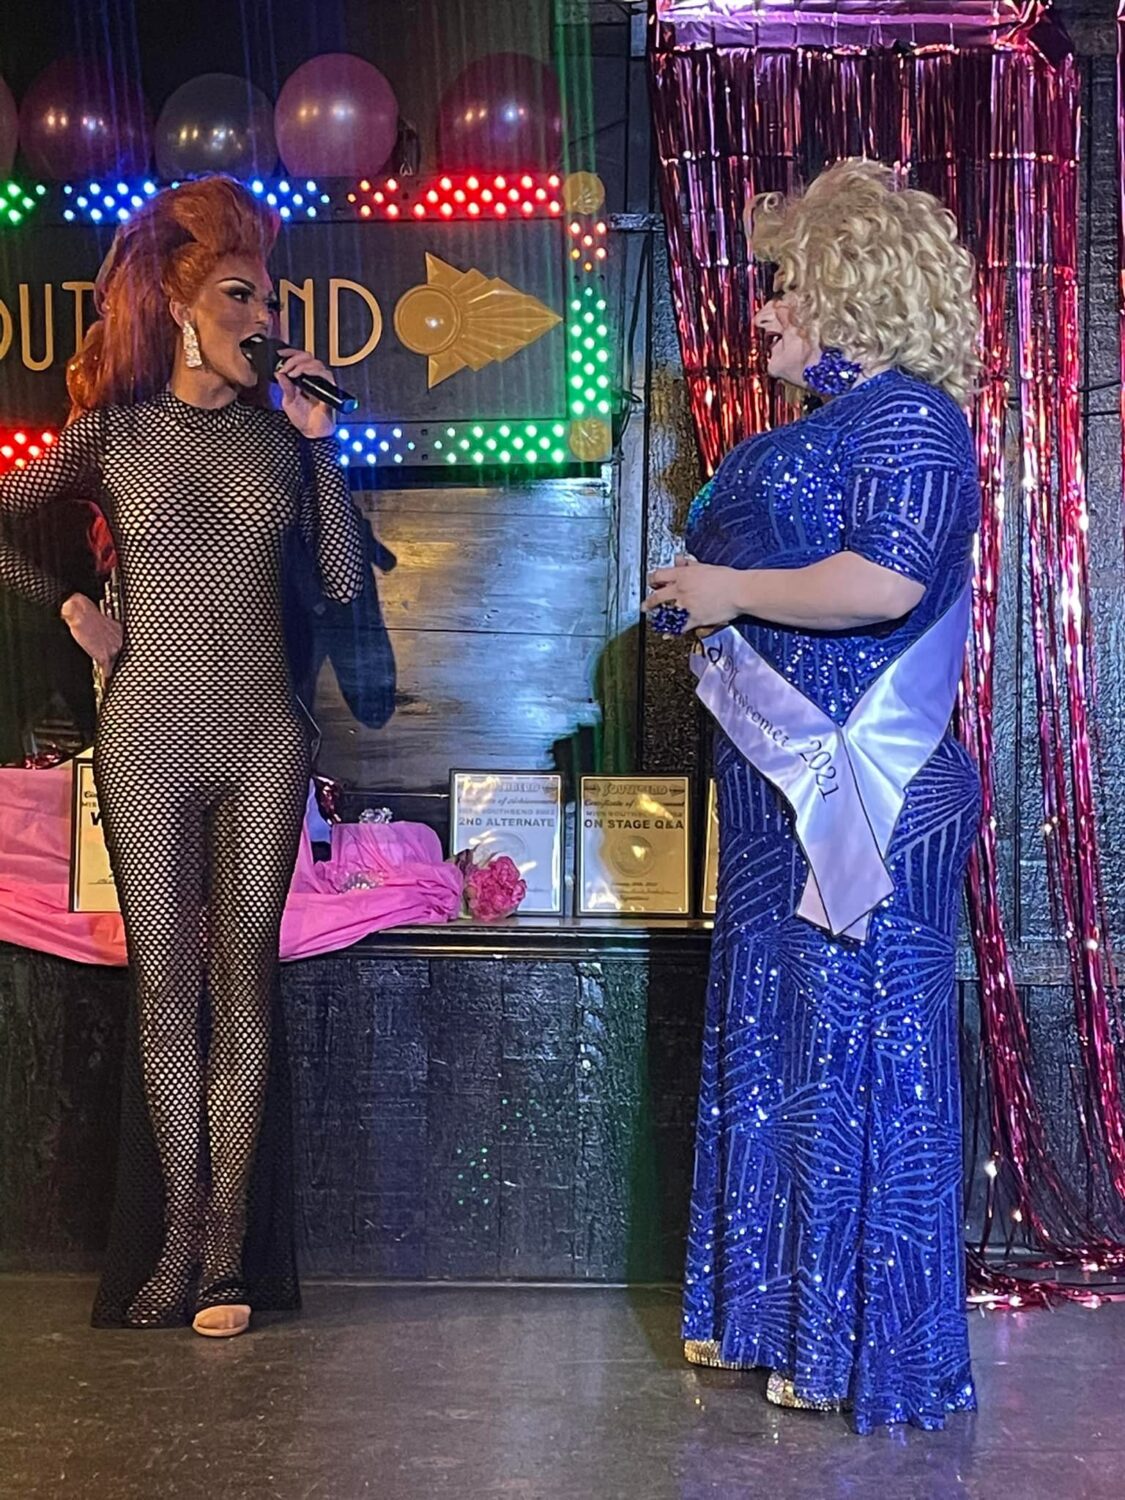 Jennifer Lynn Ali and Traci Von Trapp | Miss Southbend Pageant | Southbend Tavern (Columbus, Ohio) | 1/30/2022 [Photo by Vintage Blue]